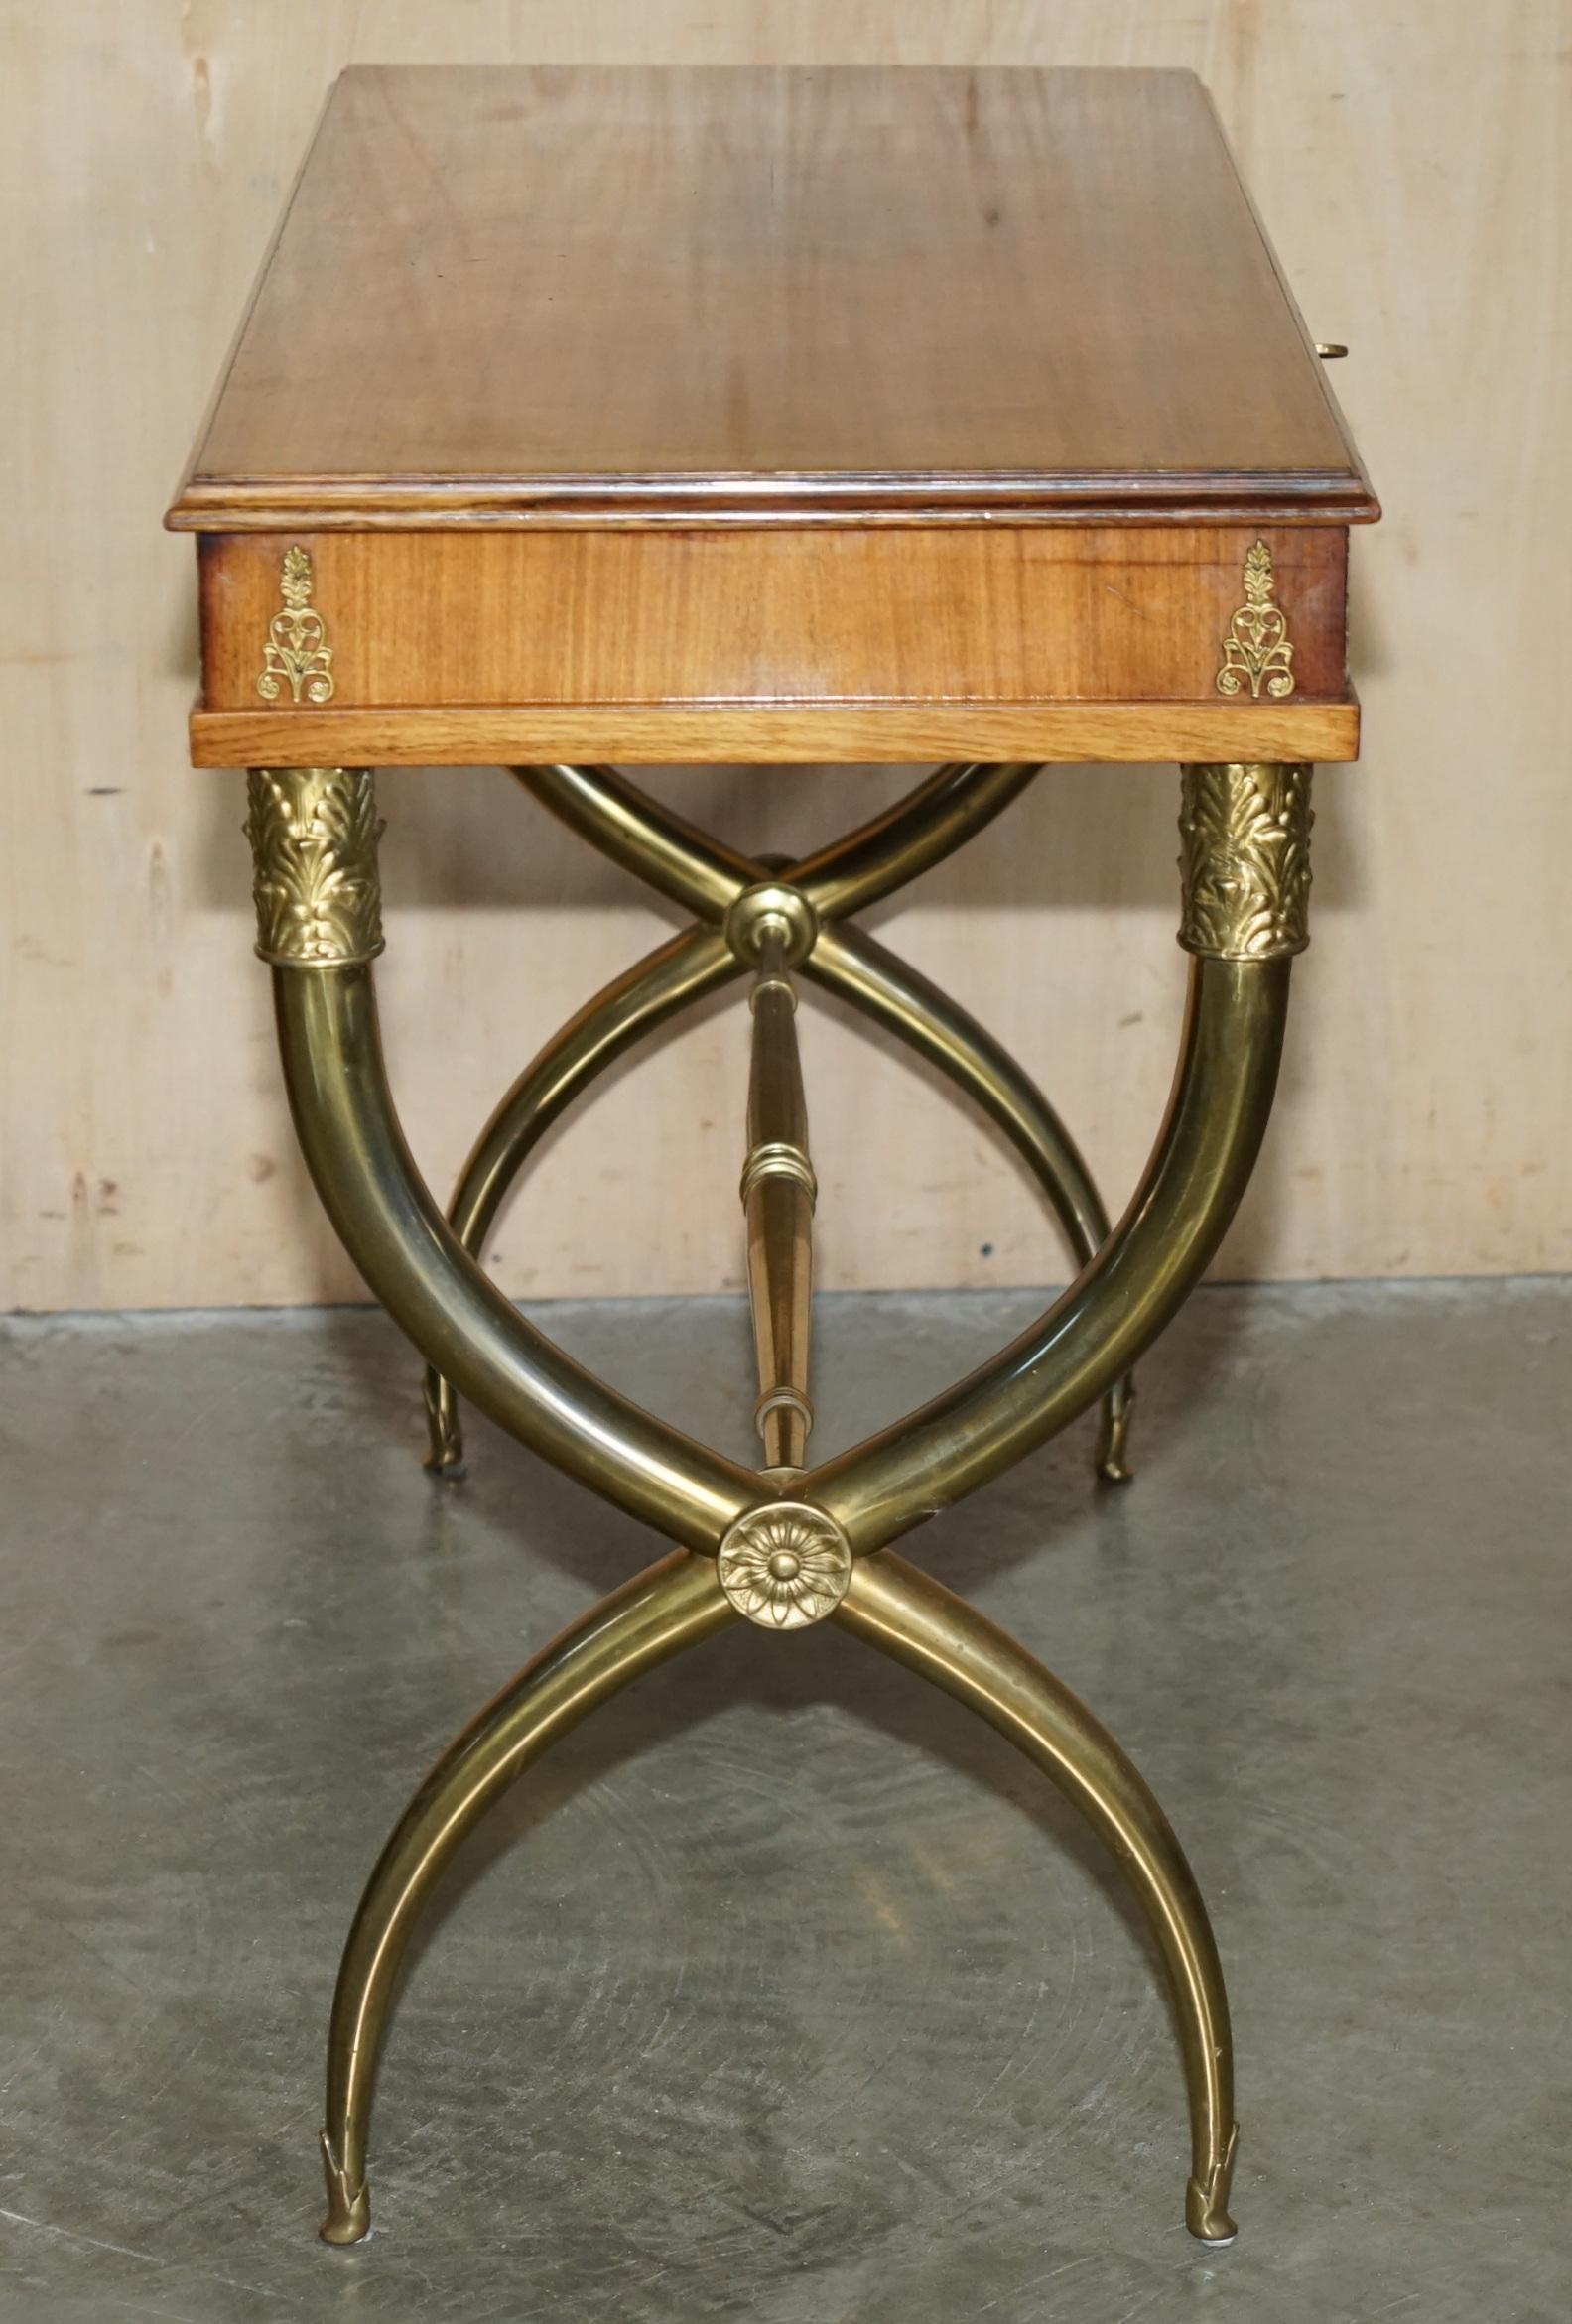 STUNNING REGENCY STYLE NEOCLASSICAL BRASS & WALNUT WRiTING TABLE DESK CIRCA 1920 For Sale 8